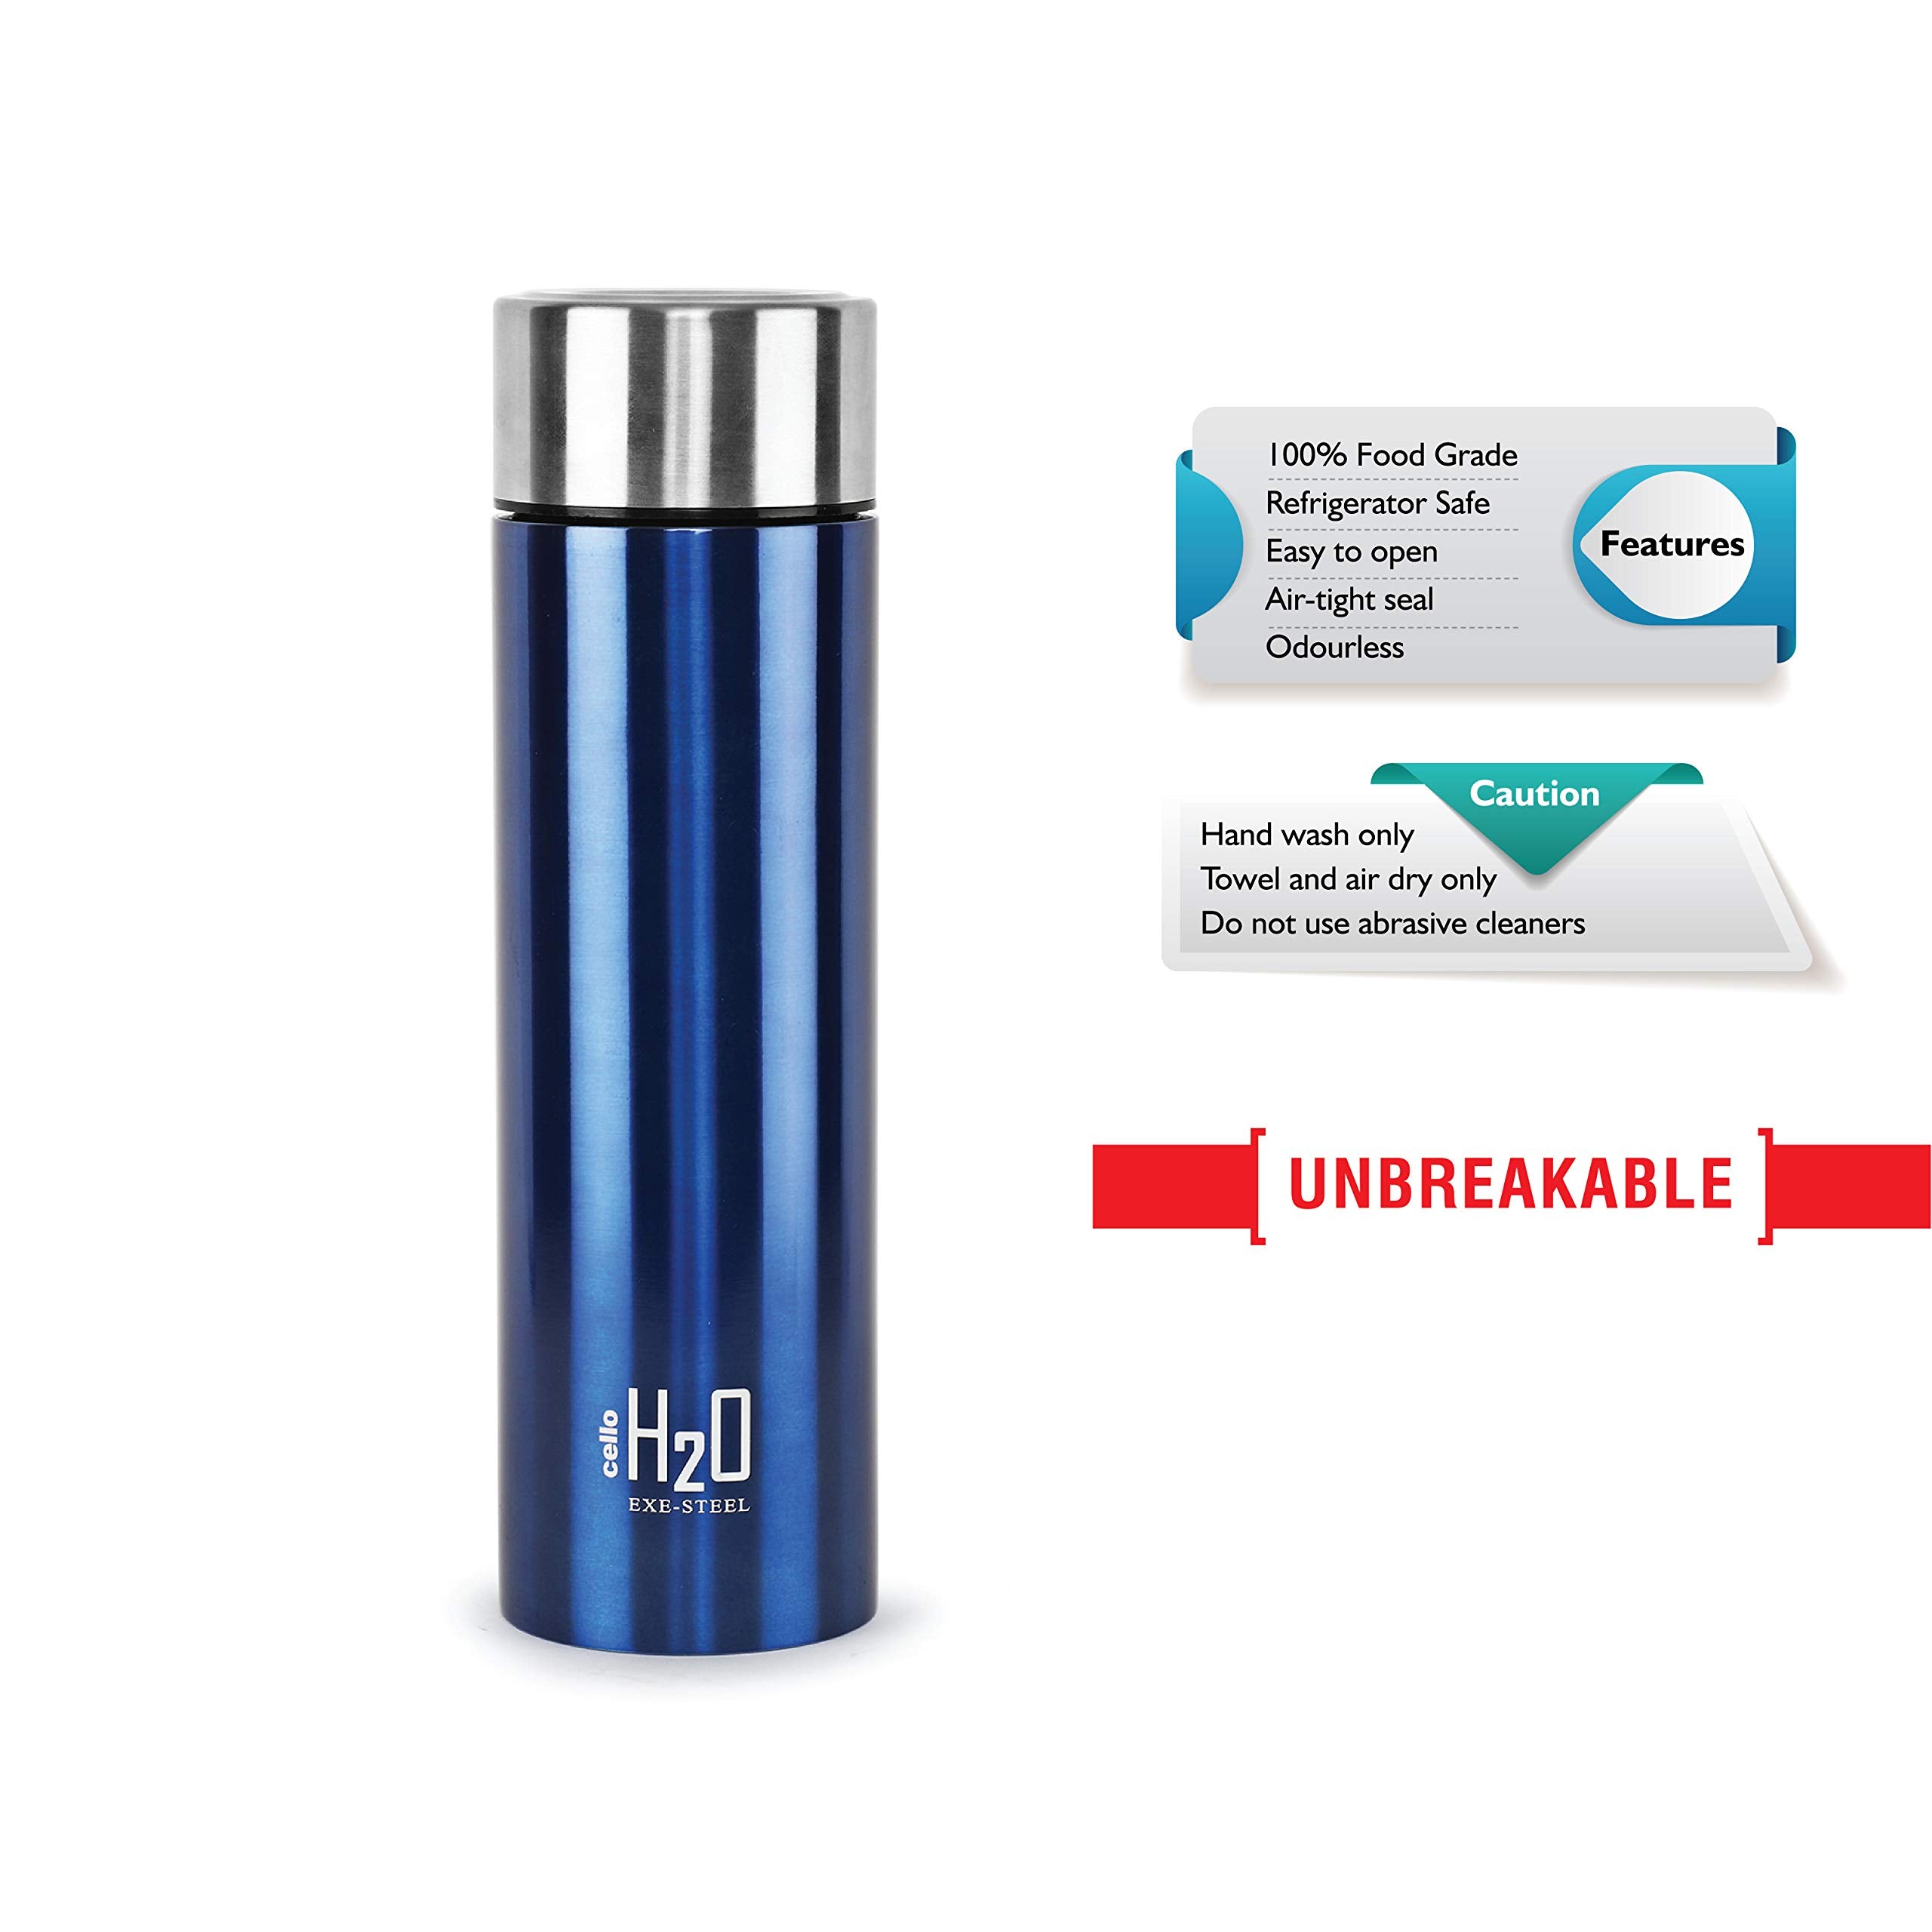 Cello H2O Stainless Steel Water Bottle, 1 Litre, Blue -   in Sri Lanka from Arcade Online Shopping - Just Rs. 2990!